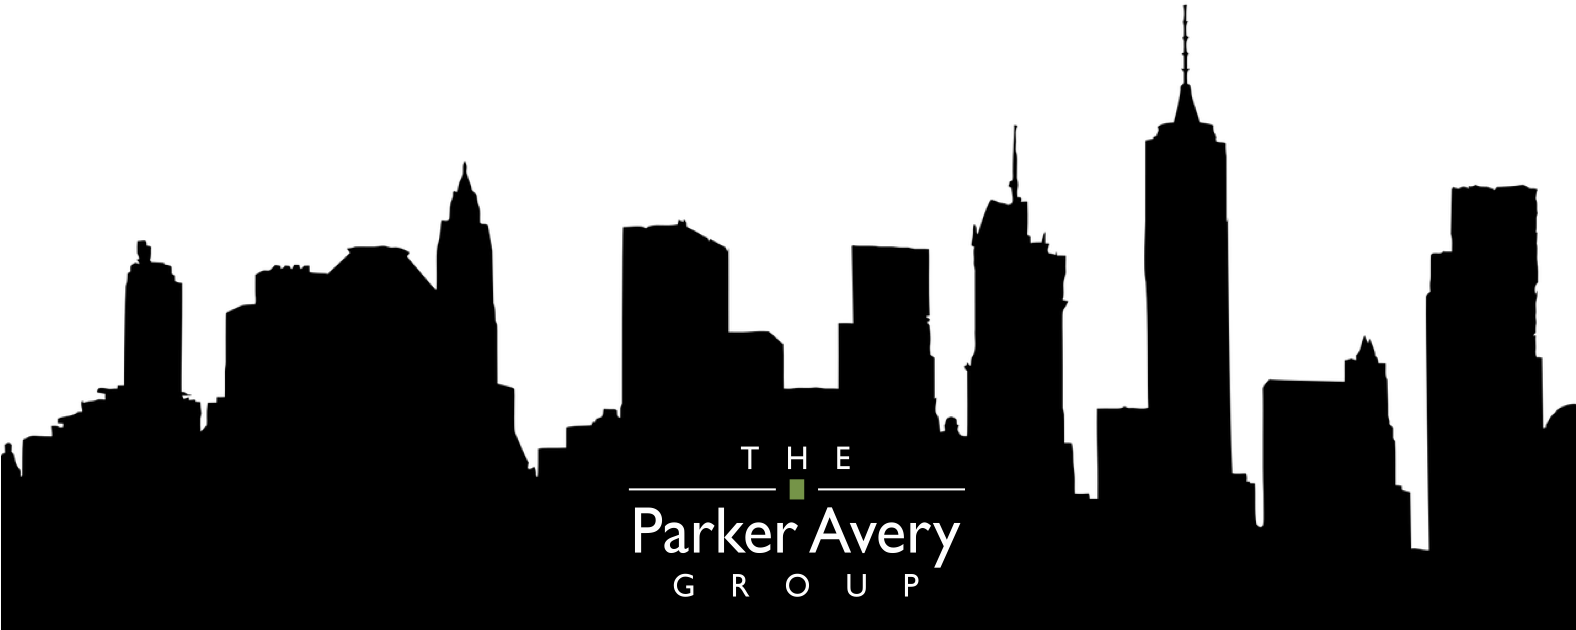 Parker Avery Group Silhouette Skyline PNG